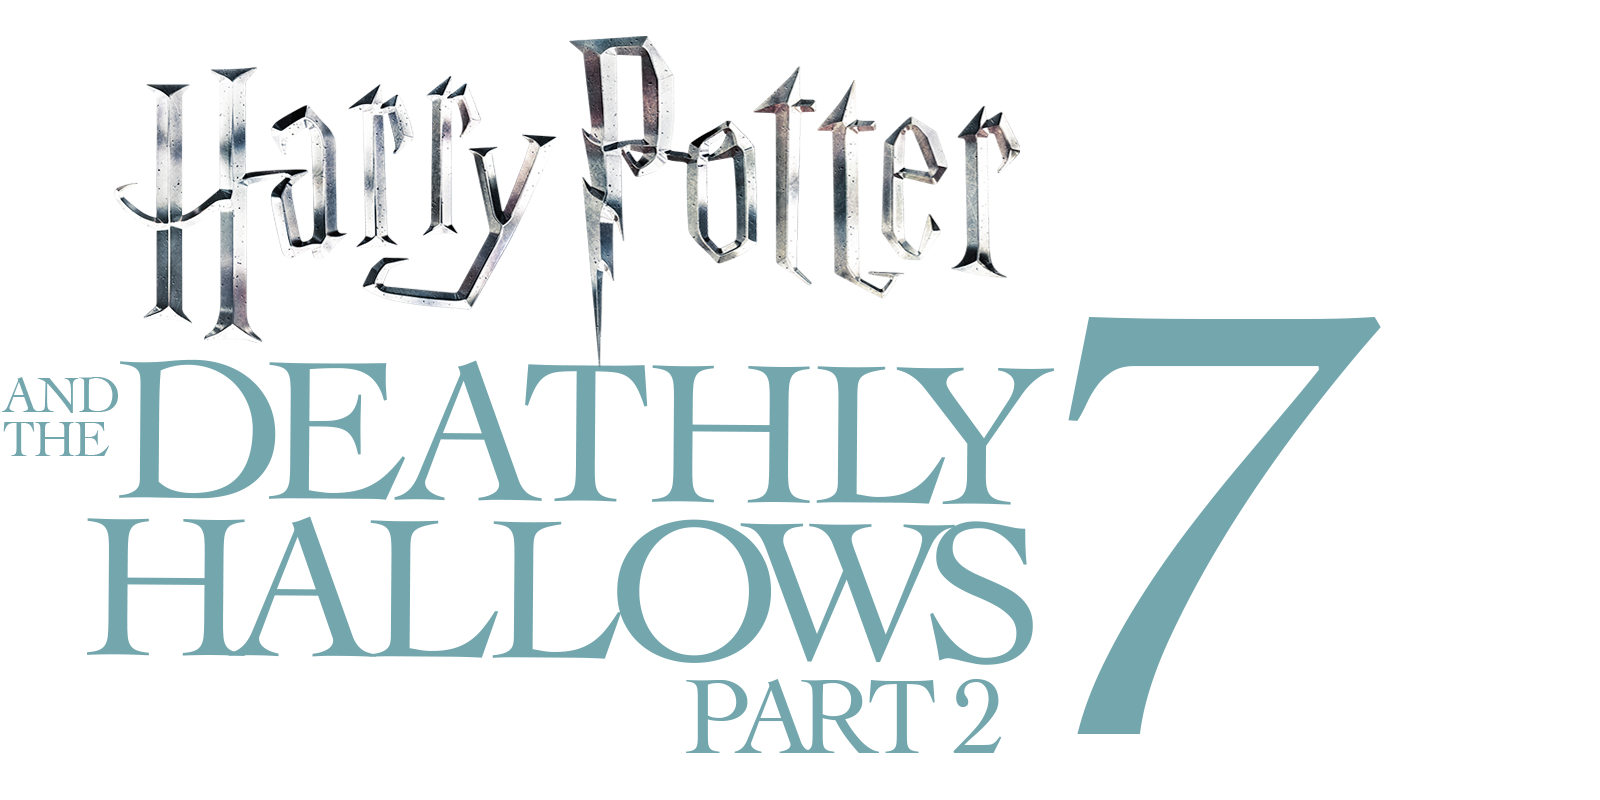 harry potter and the deathly hallows: part 2 movie